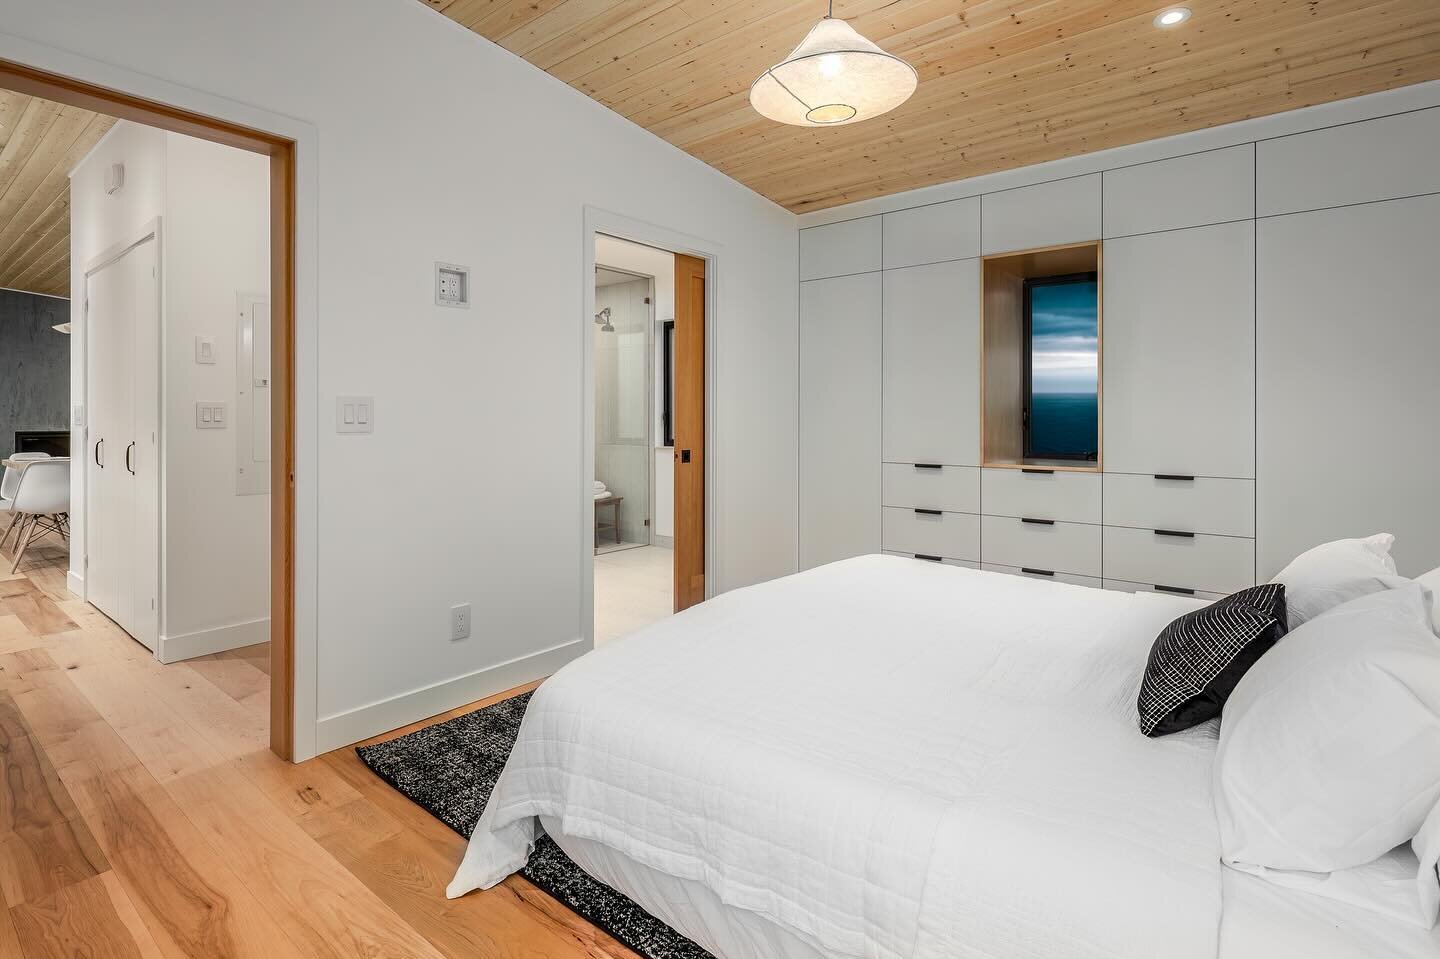 Absolutely love the style of this modern Vesta home brought to you by @family.tree.homes 👏🏼🙏📸

www.innovativepropertymedia.com

#nanaimo 
#vanislephotographer 
#vancouverisland 
#localbusiness 
#masterbedroom 
#bedroom 
#comfort 
#photooftheday 
